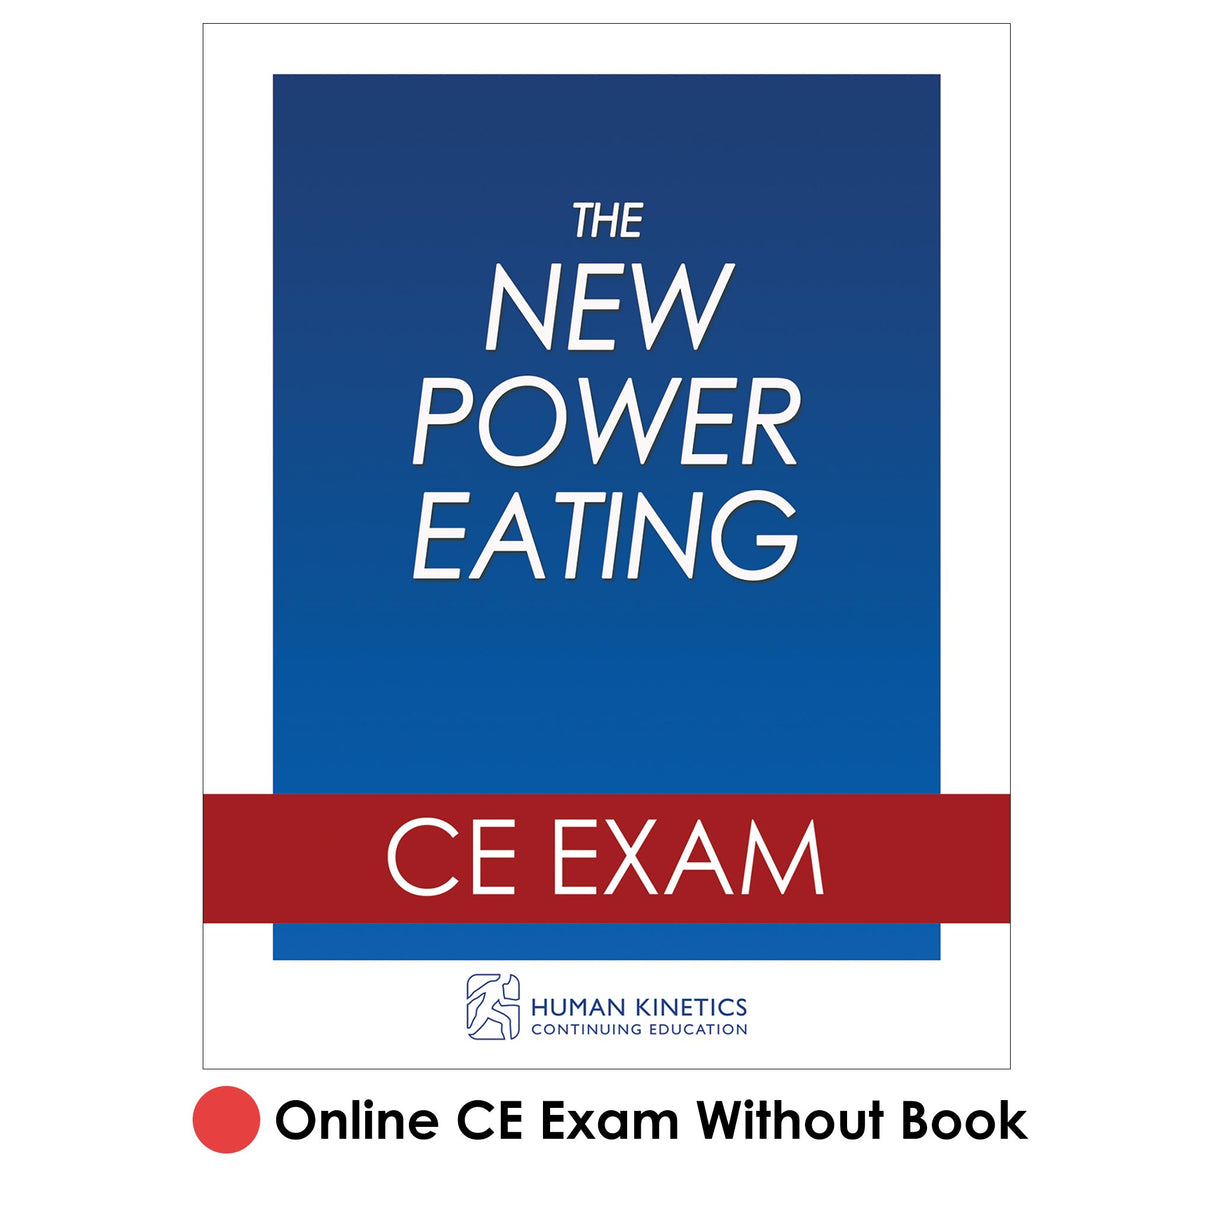 New Power Eating Online CE Exam Without Book, The